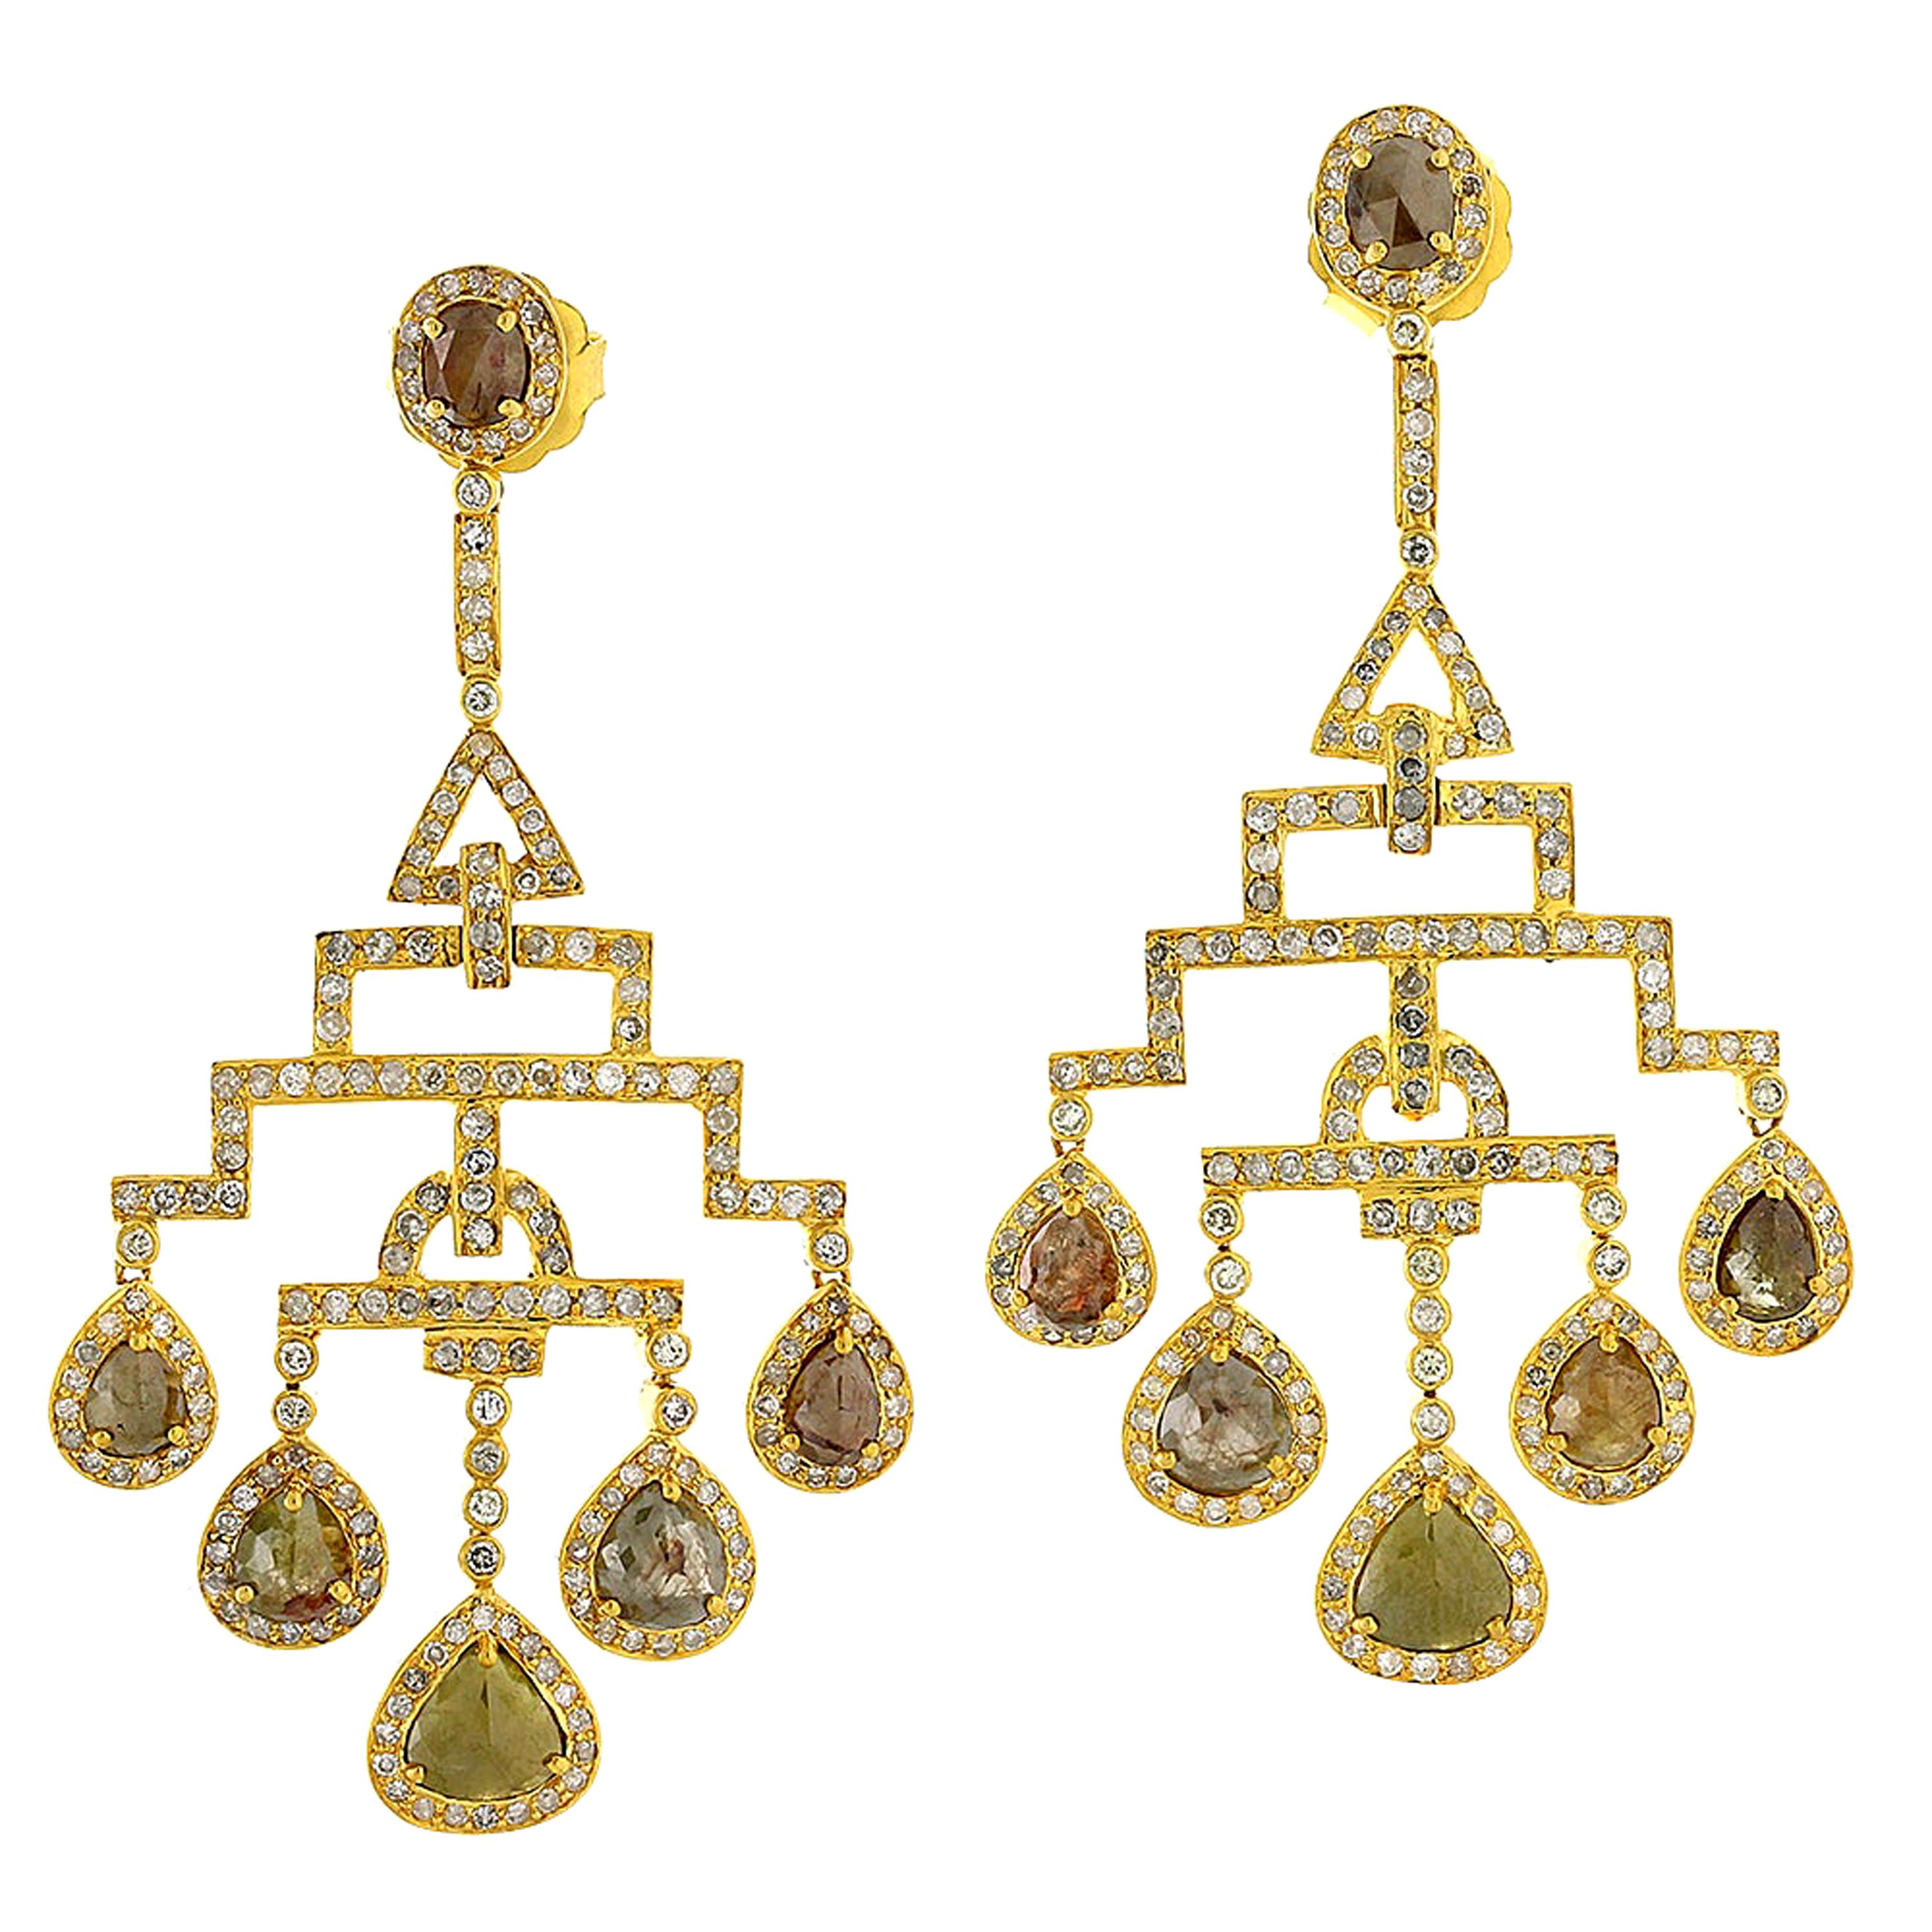 10.2ct Ice Diamond Chandelier Earrings Made in 18K Yellow Gold For Sale